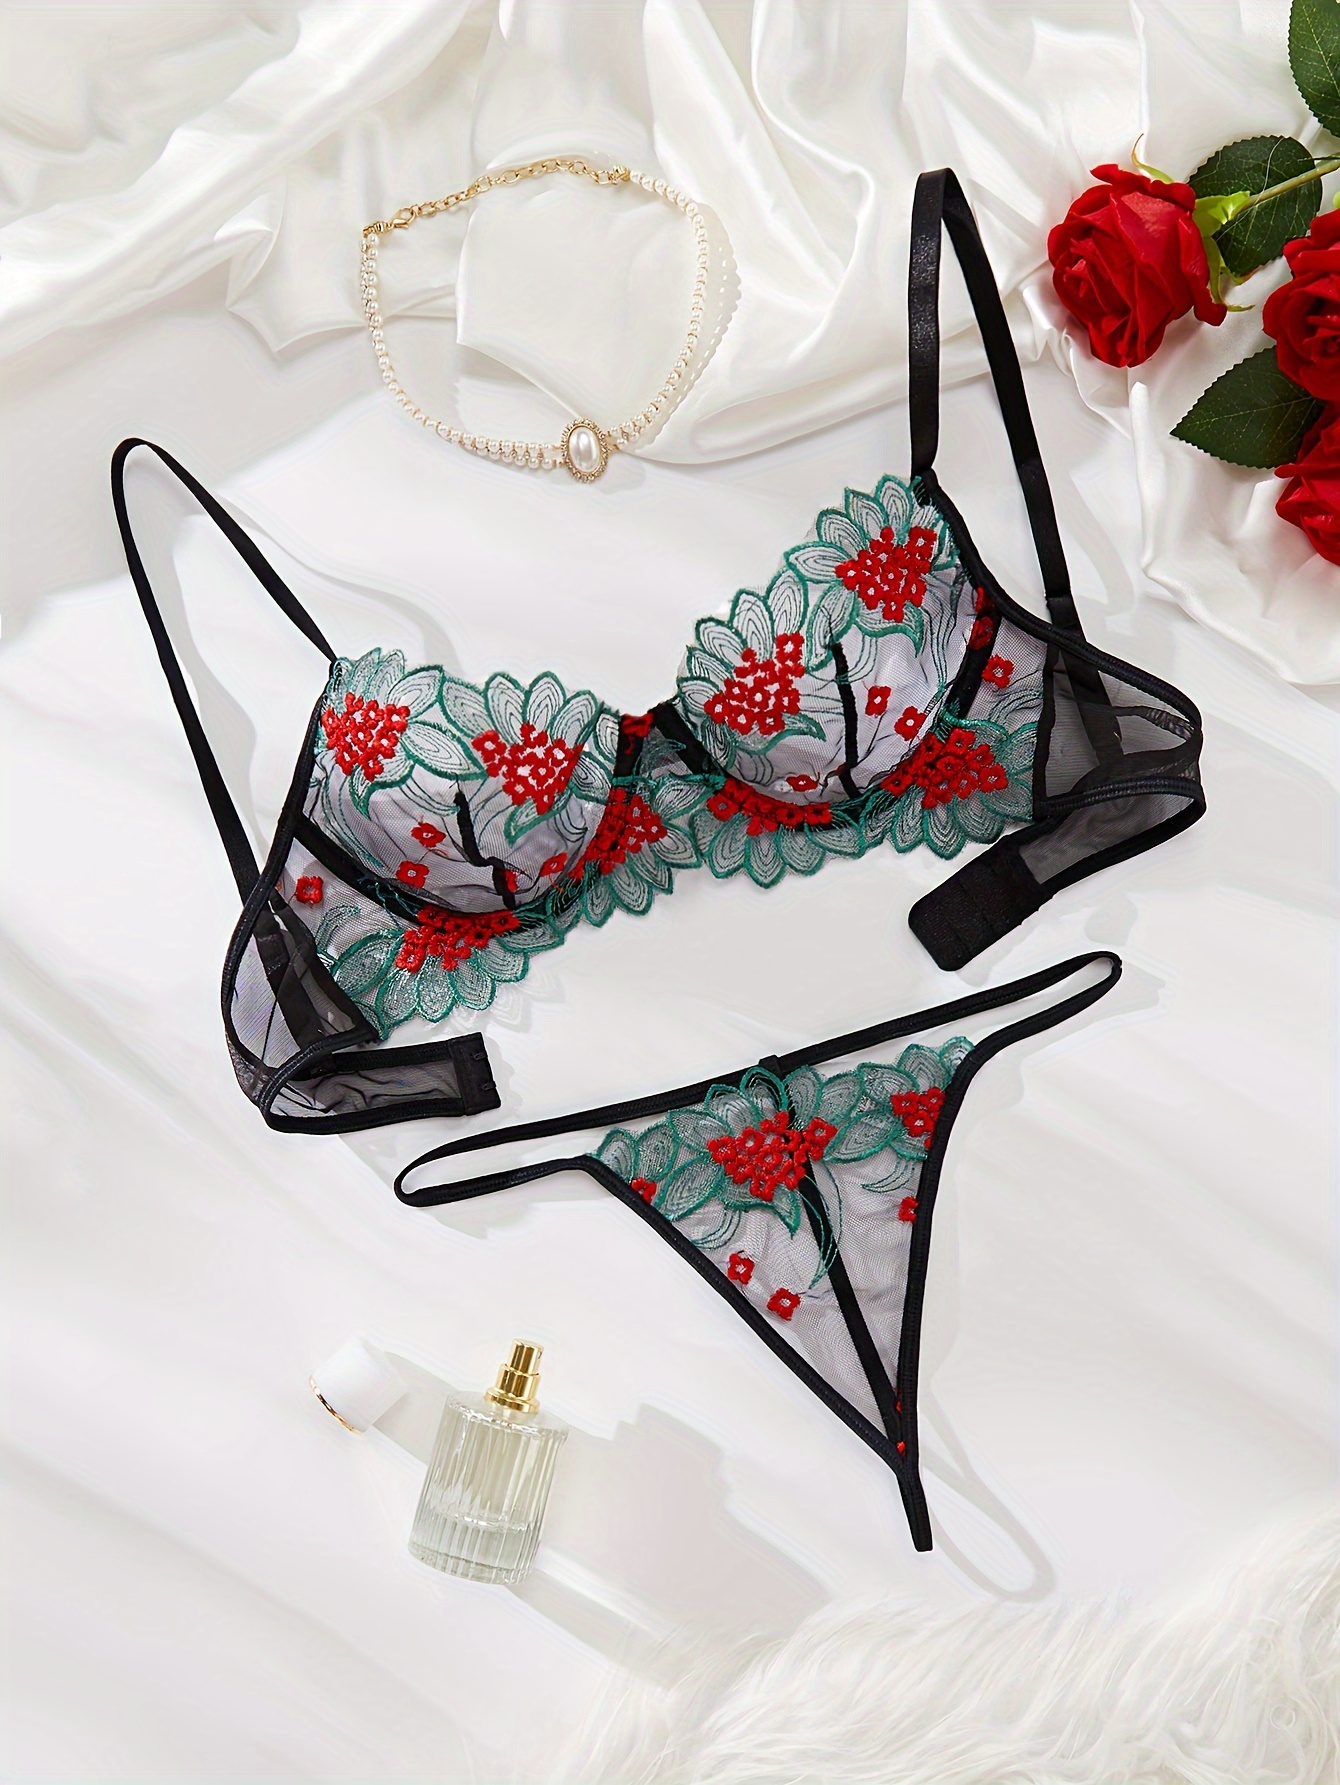 Red Lace Bra On White Background With Live Rose Flower Stock Photo